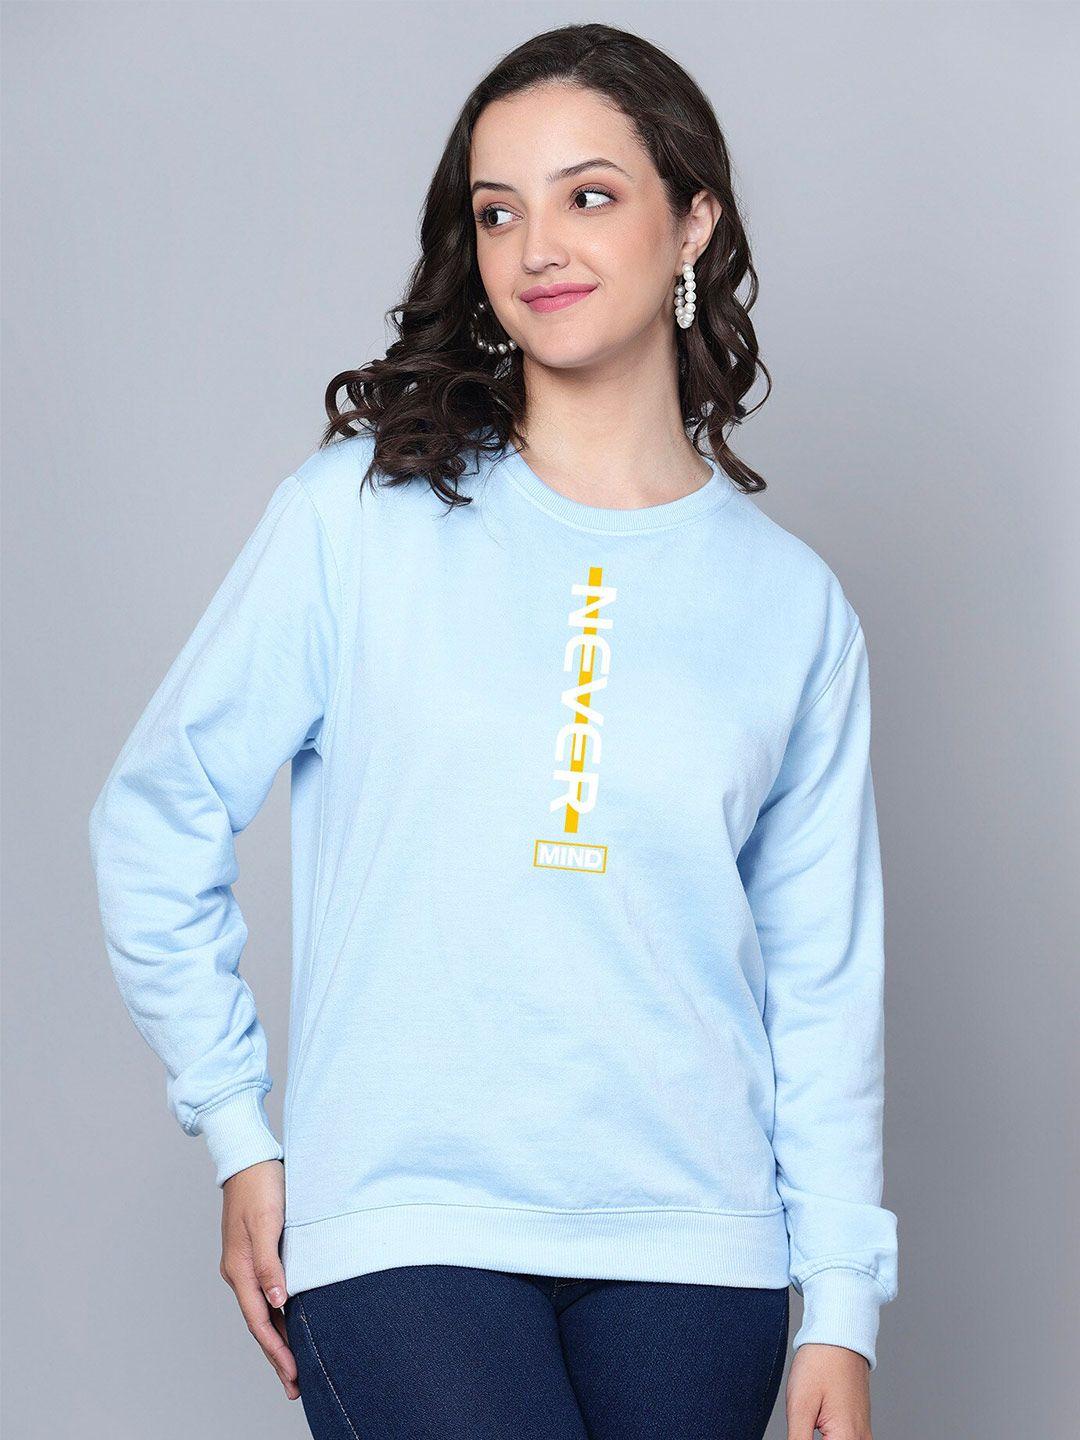 fashion and youth typography printed fleece pullover